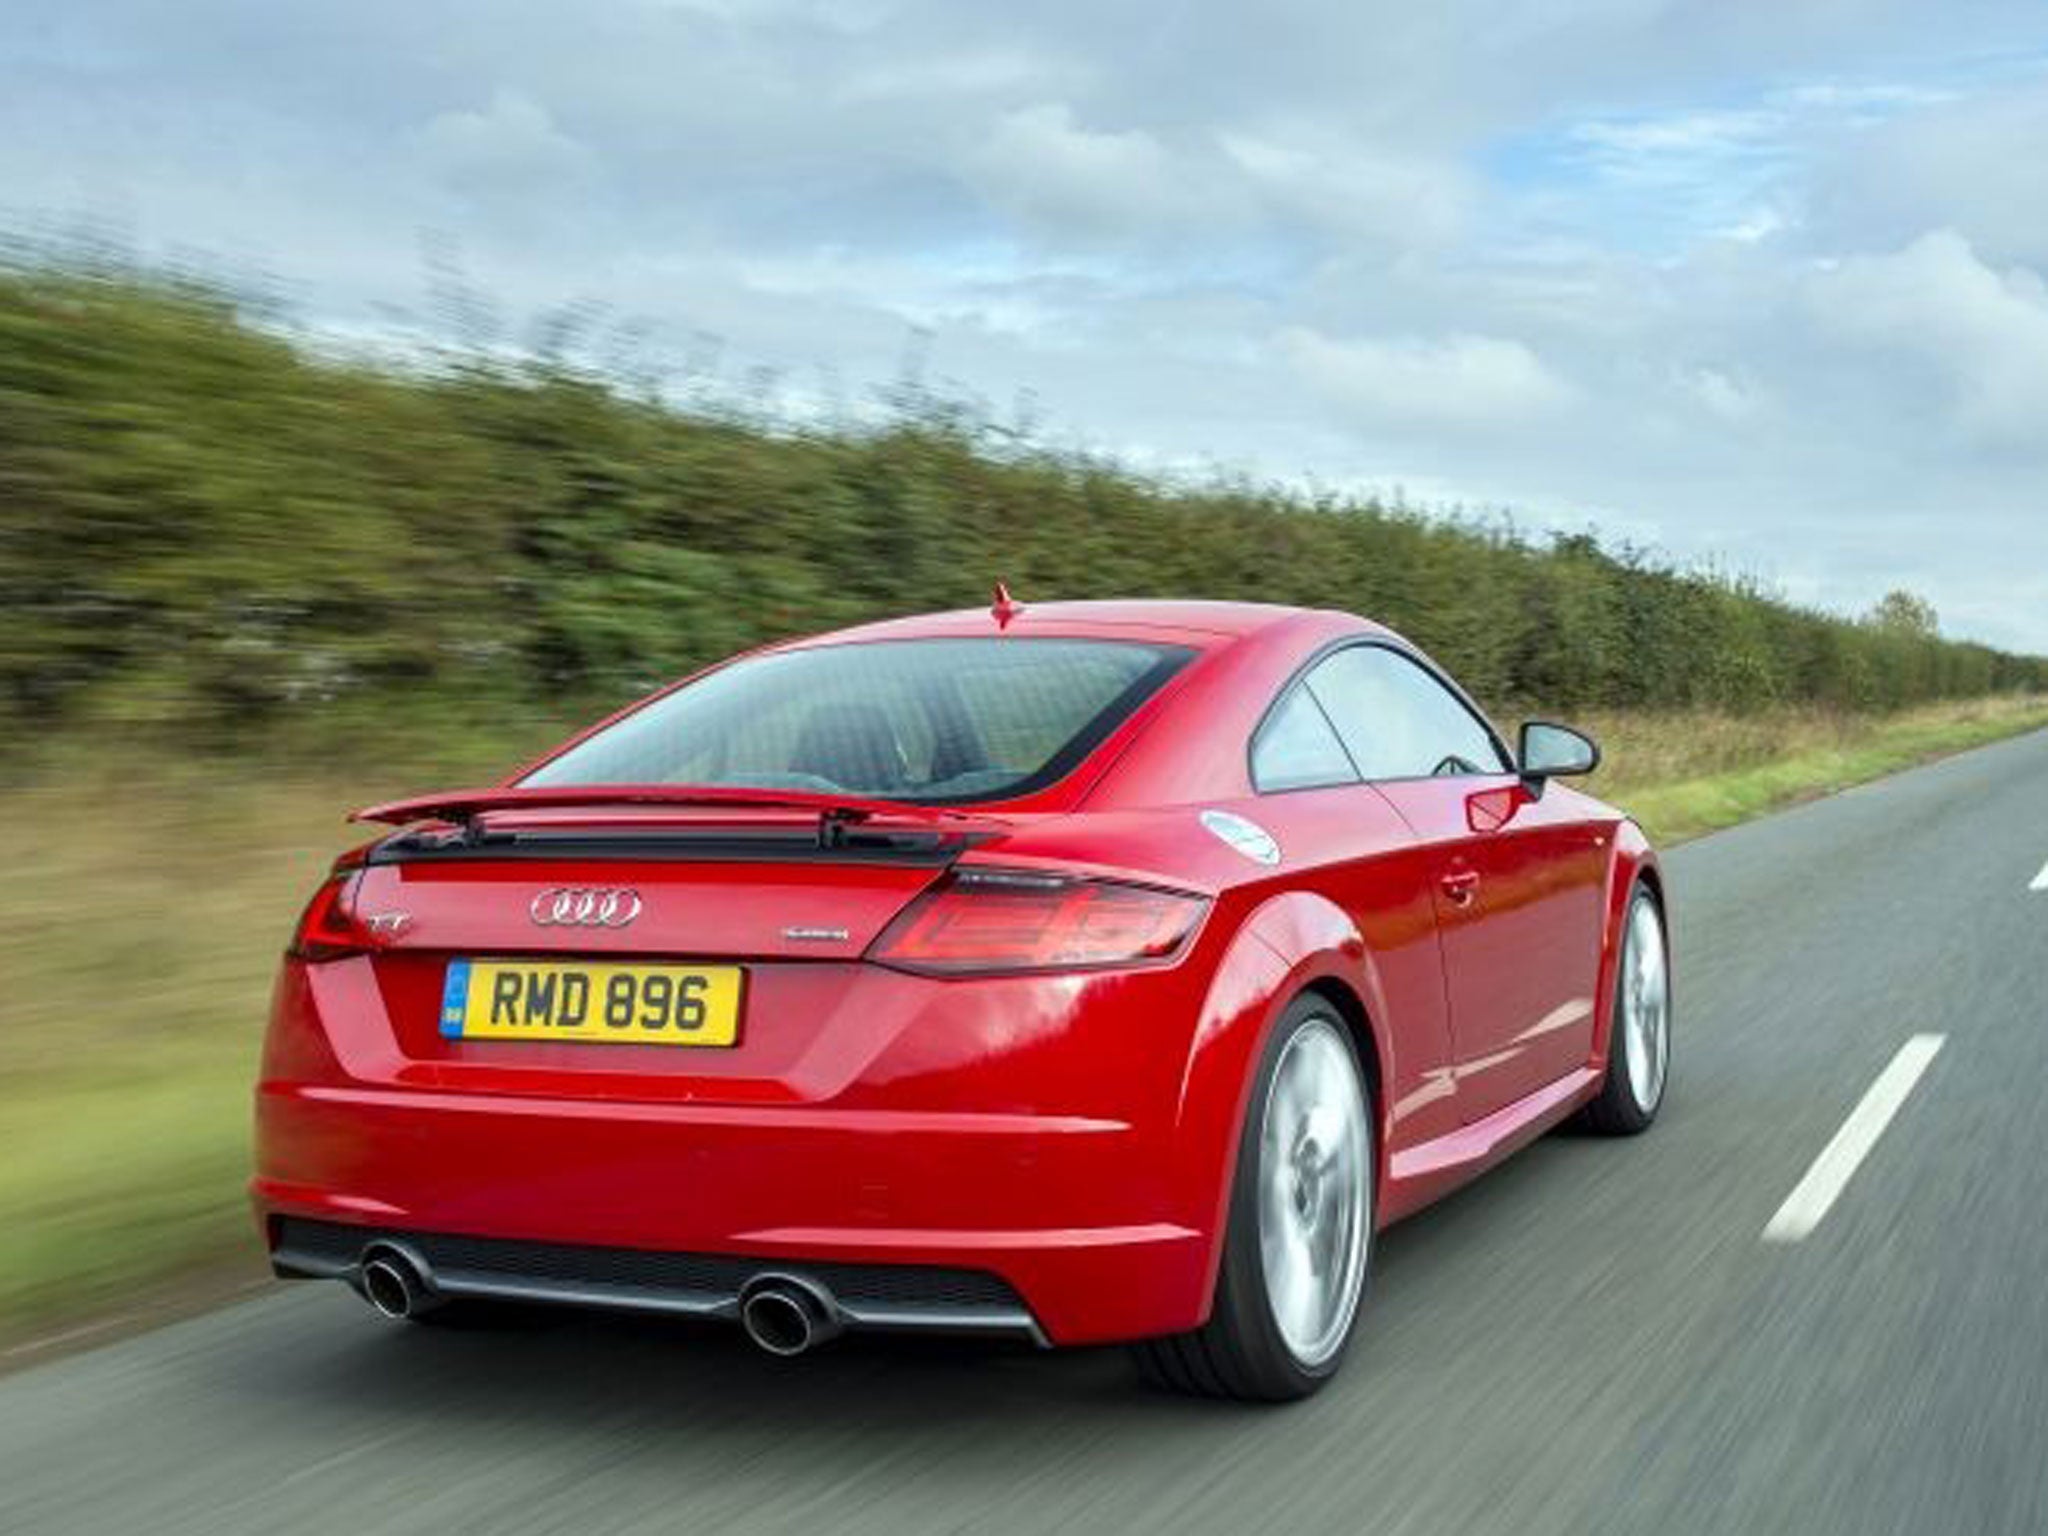 The new TT will hit 60mph in 4.6 seconds, thanks to its rapid-changing double-clutch gearbox